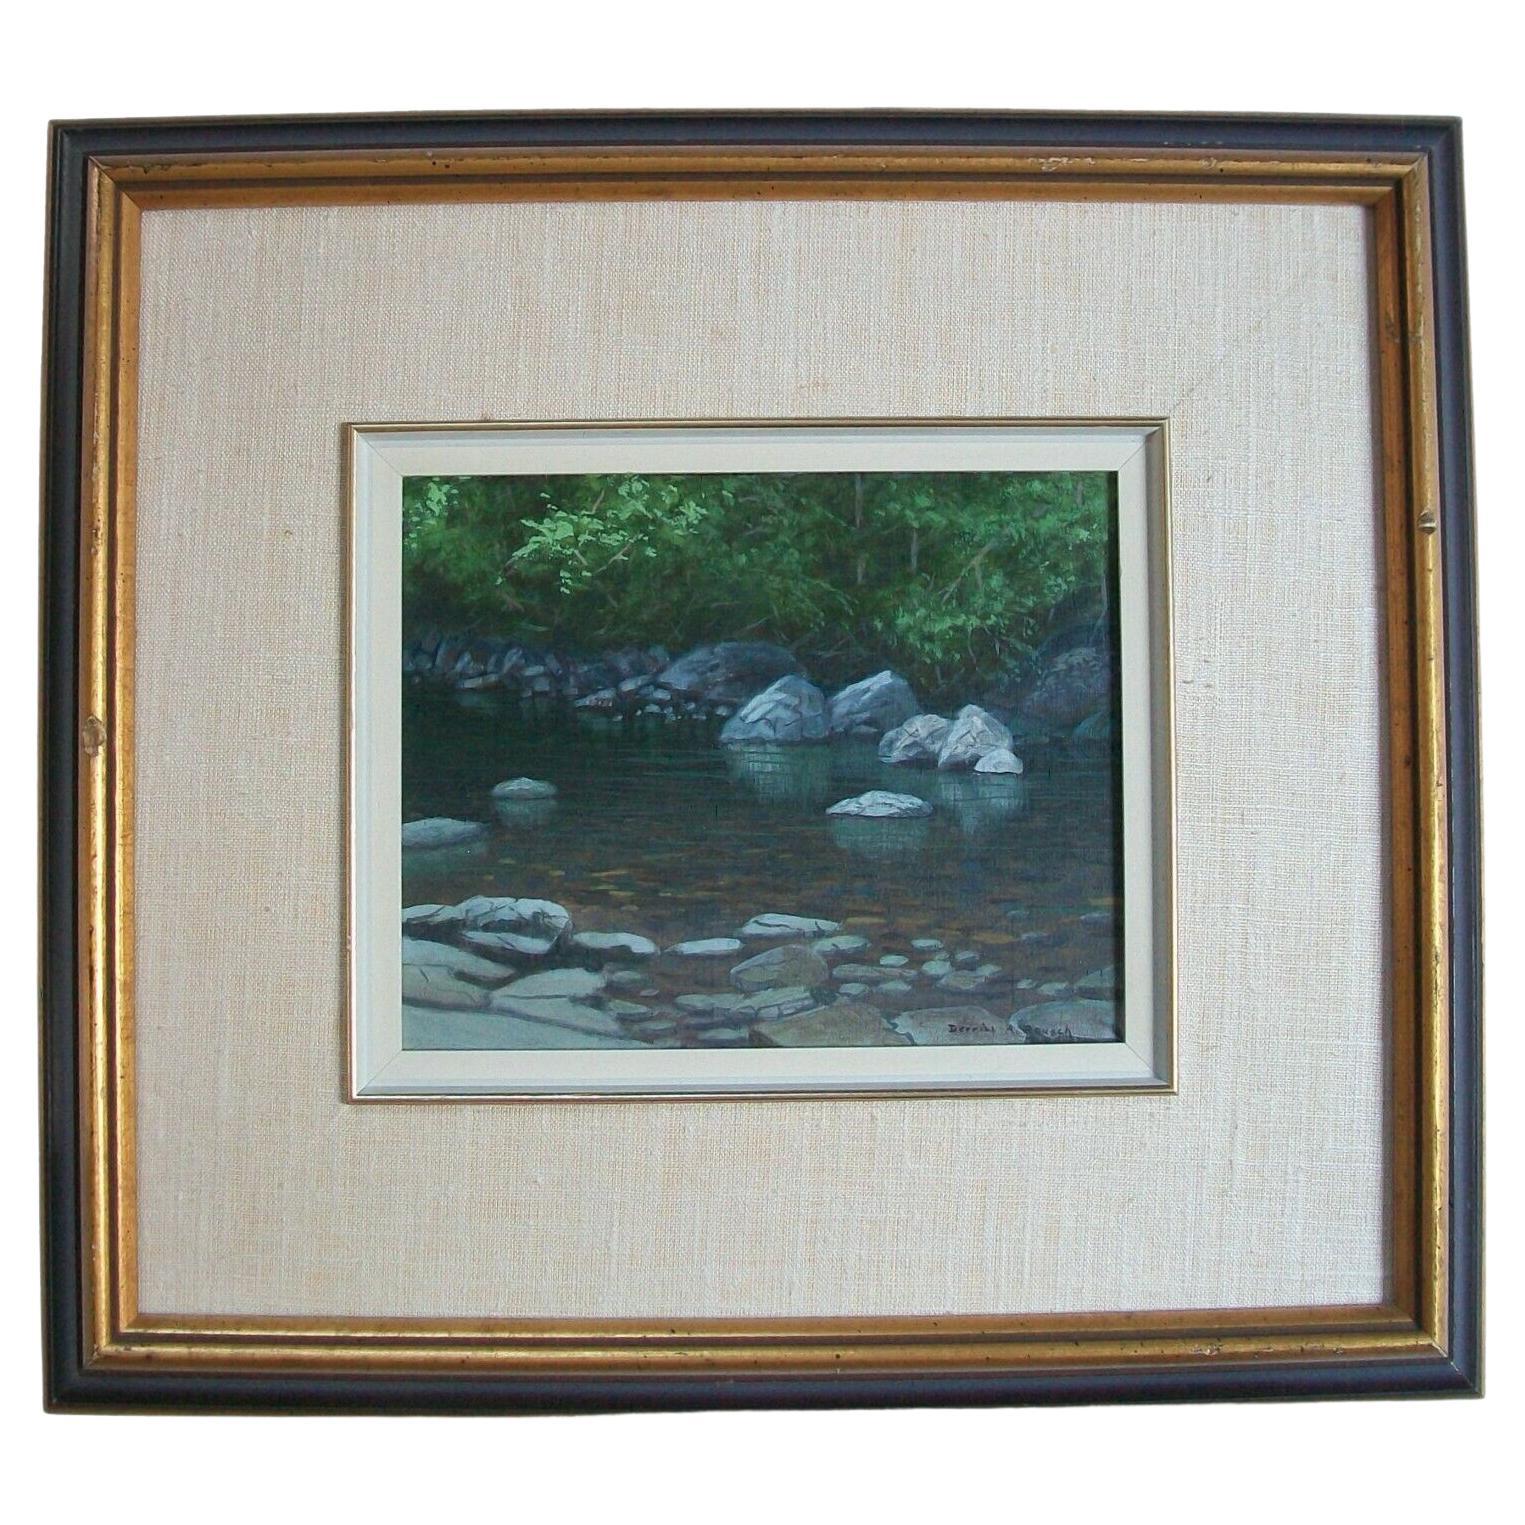 DERRILL ALLAN RAUSCH (1938-2007) - Untitled - British Columbia coastal landscape oil painting on Masonite panel - original gilded finish wood frame, beige linen liner and gilt edged filet - signed lower right - Canada - late 20th